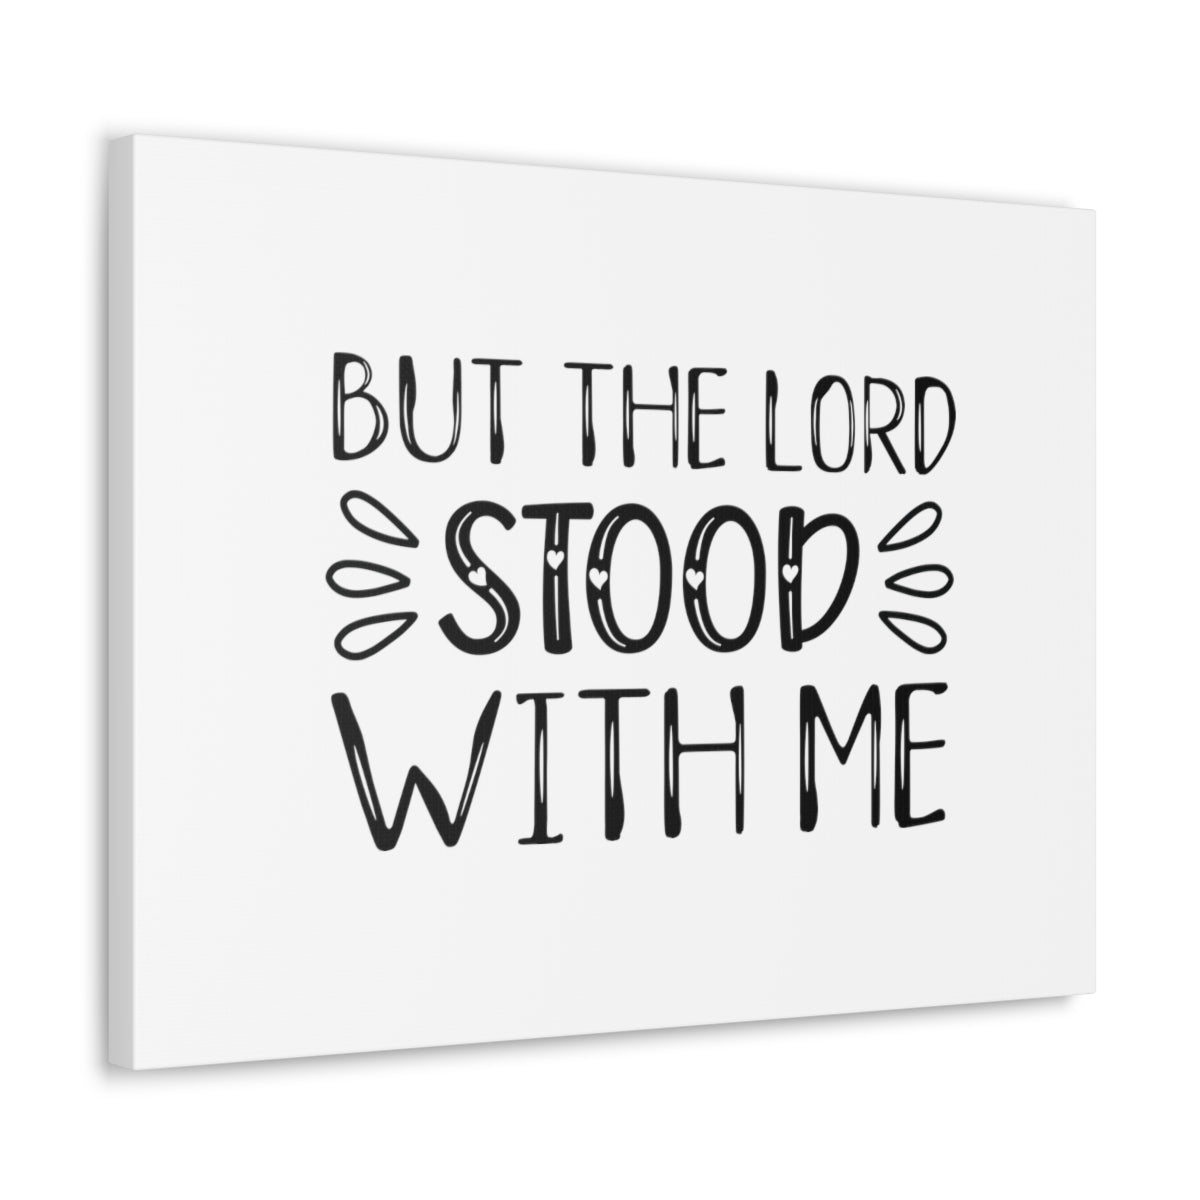 Scripture Walls But The Lord Stood With Me 2 Timothy 4:17 Christian Wall Art Bible Verse Print Ready to Hang Unframed-Express Your Love Gifts